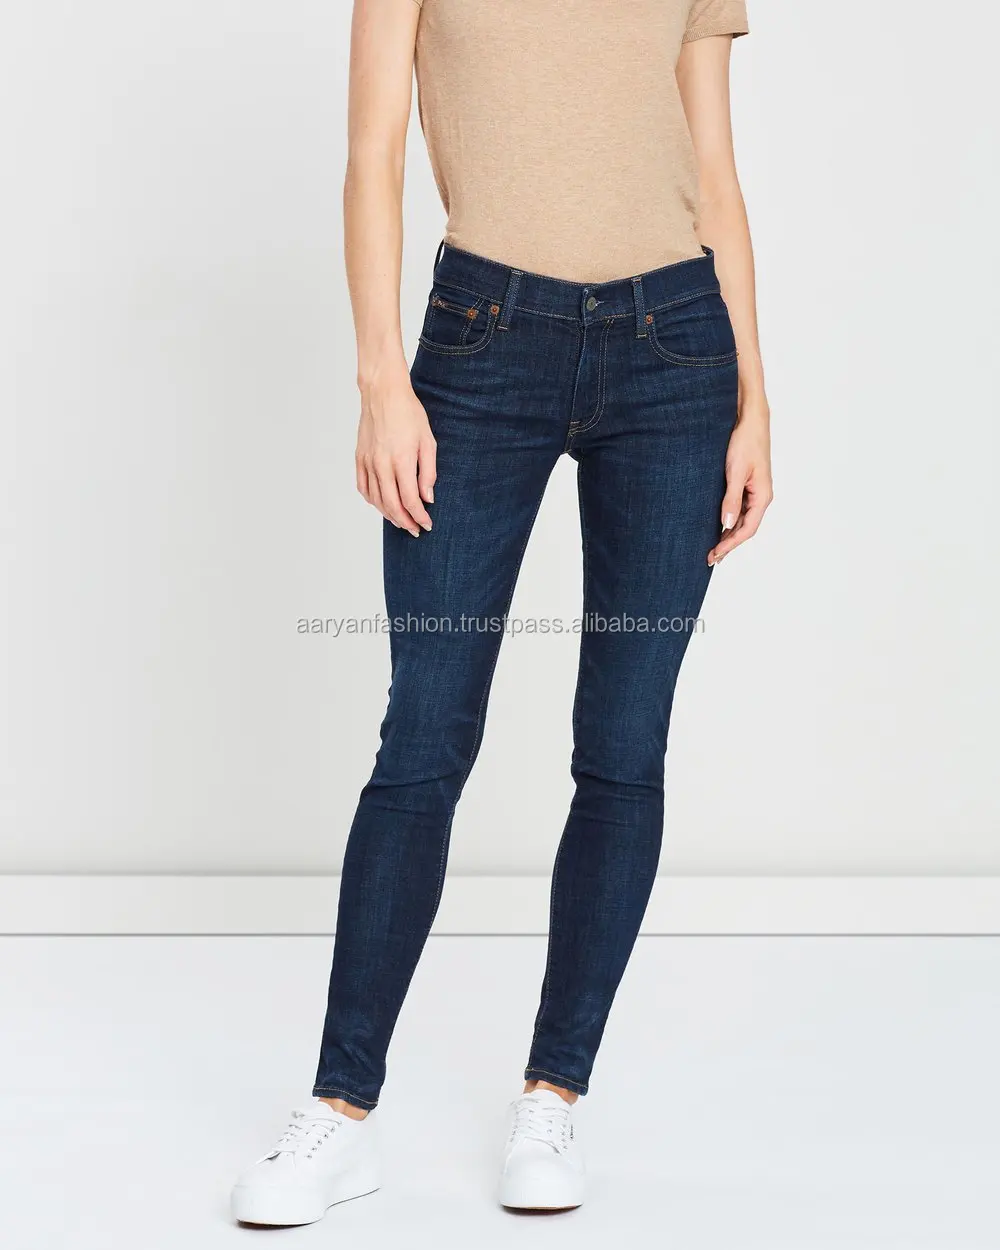 jeans with top for ladies